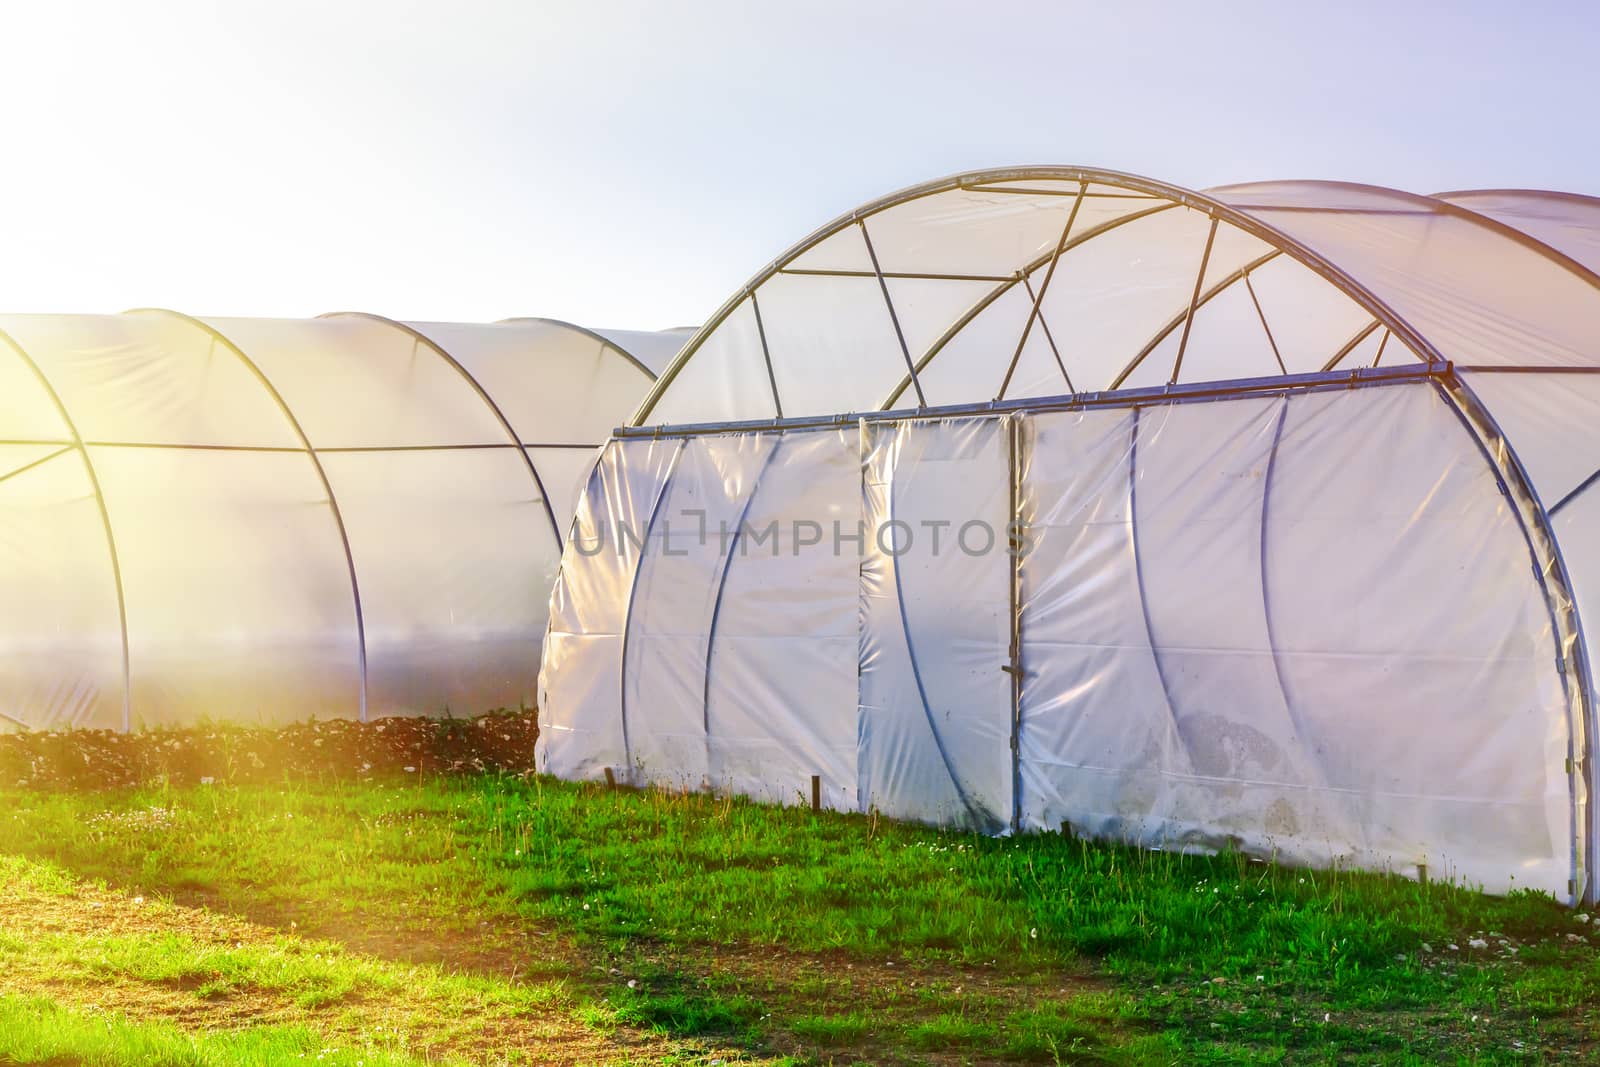 Sunset on outside view of greenhouse by pixinoo